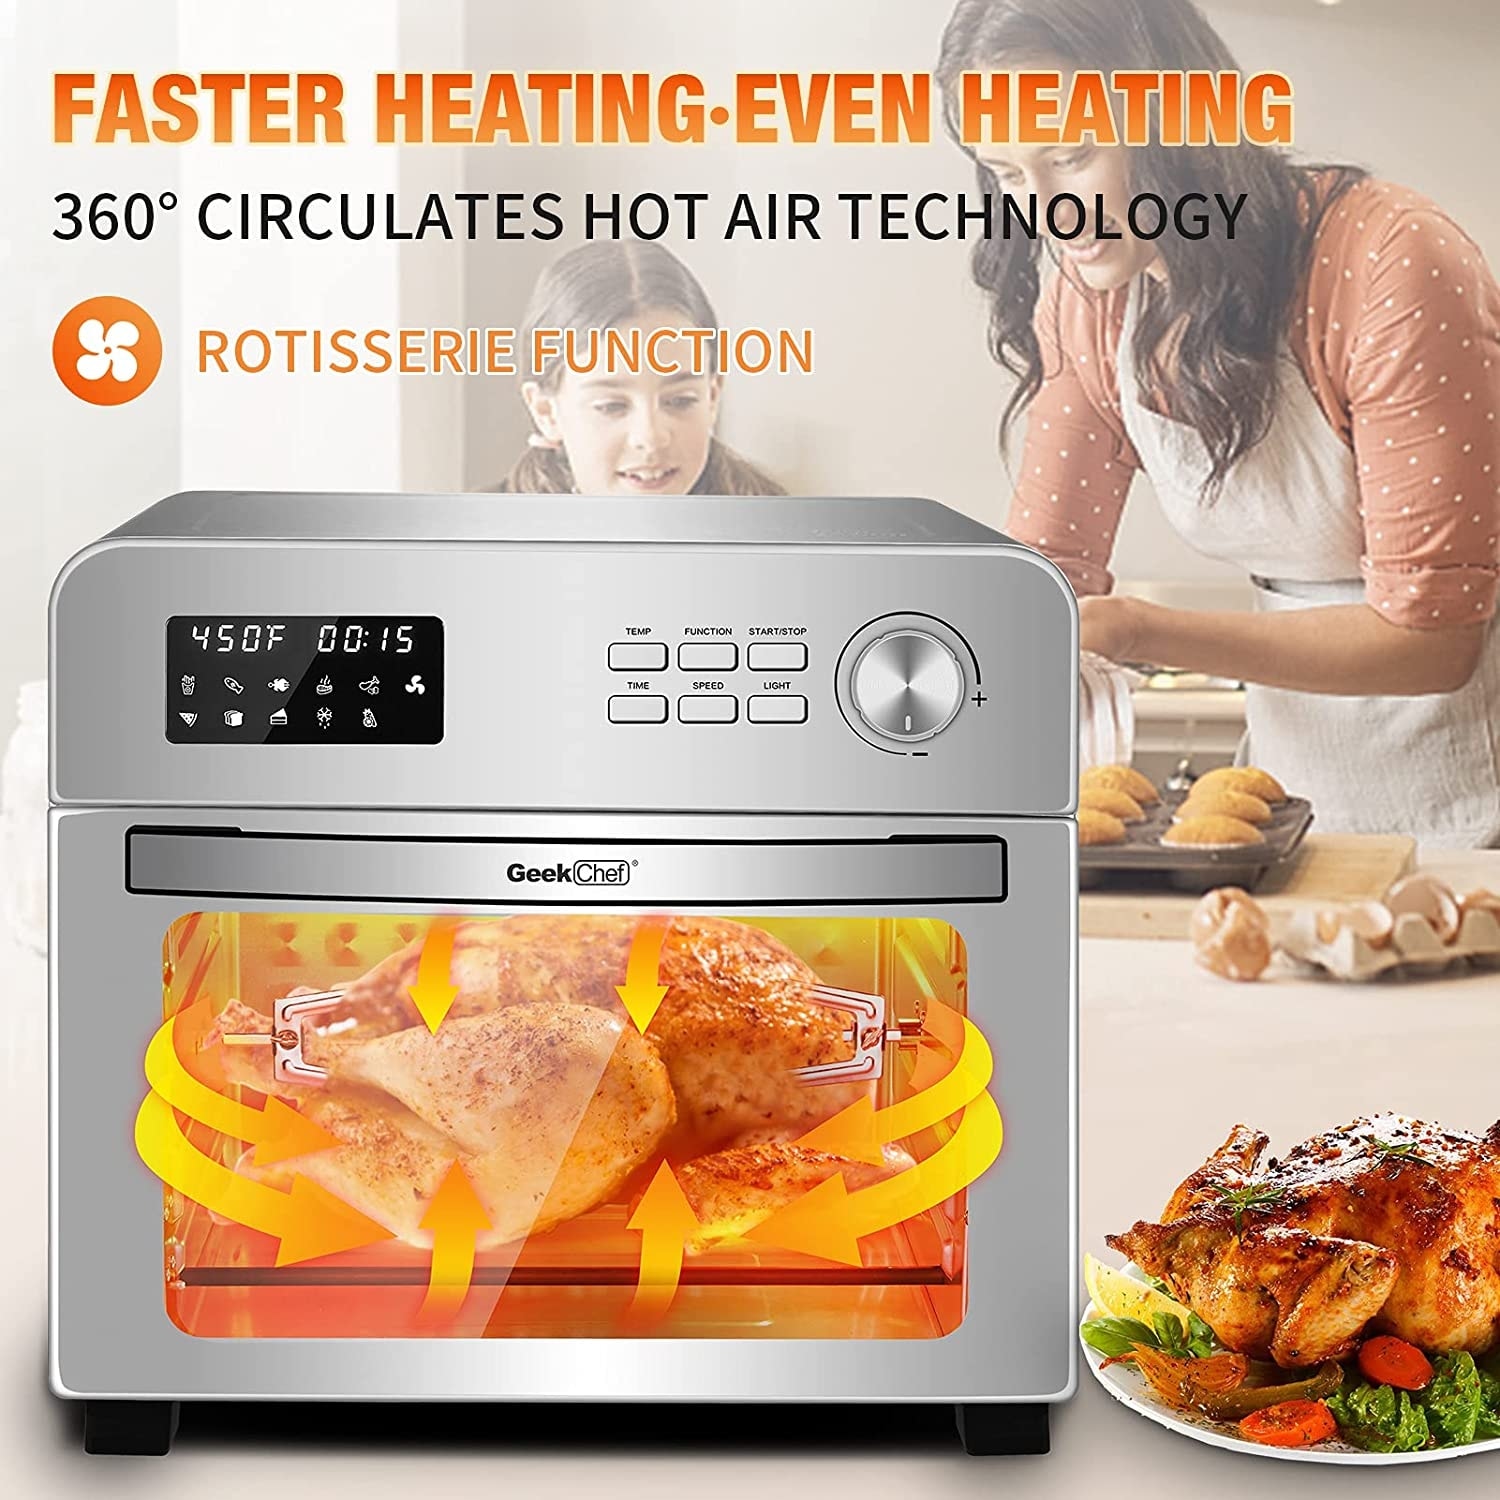 https://ak1.ostkcdn.com/images/products/is/images/direct/44c87aec927a2d2fa21d0a5a188a7a65a5b0282e/Geek-Chef-Air-Fryer-Toaster-Oven-24QT-6-Slice-Countertop-Stainless.jpg